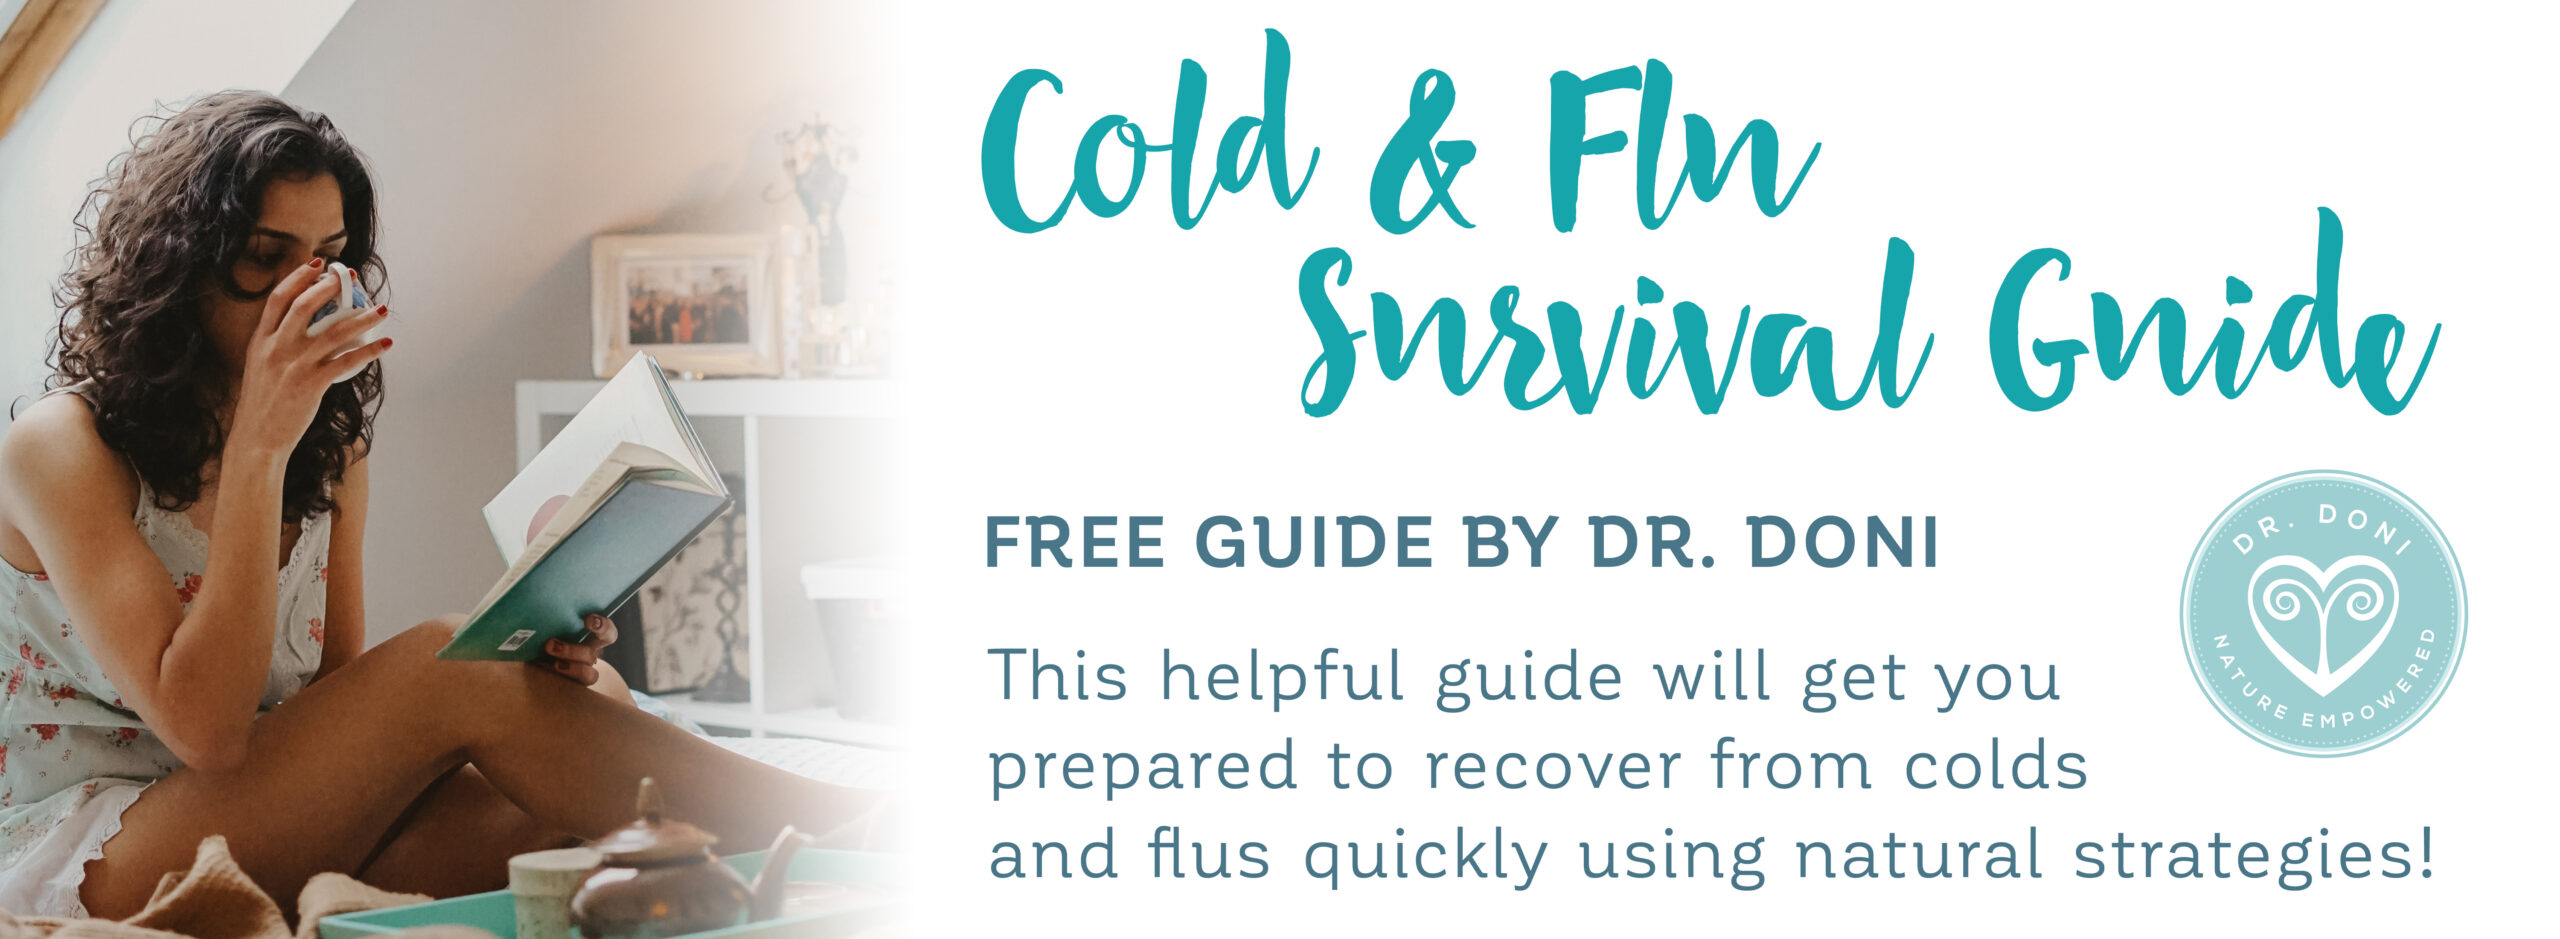 Dr. Doni’s Cold and Flu Guide